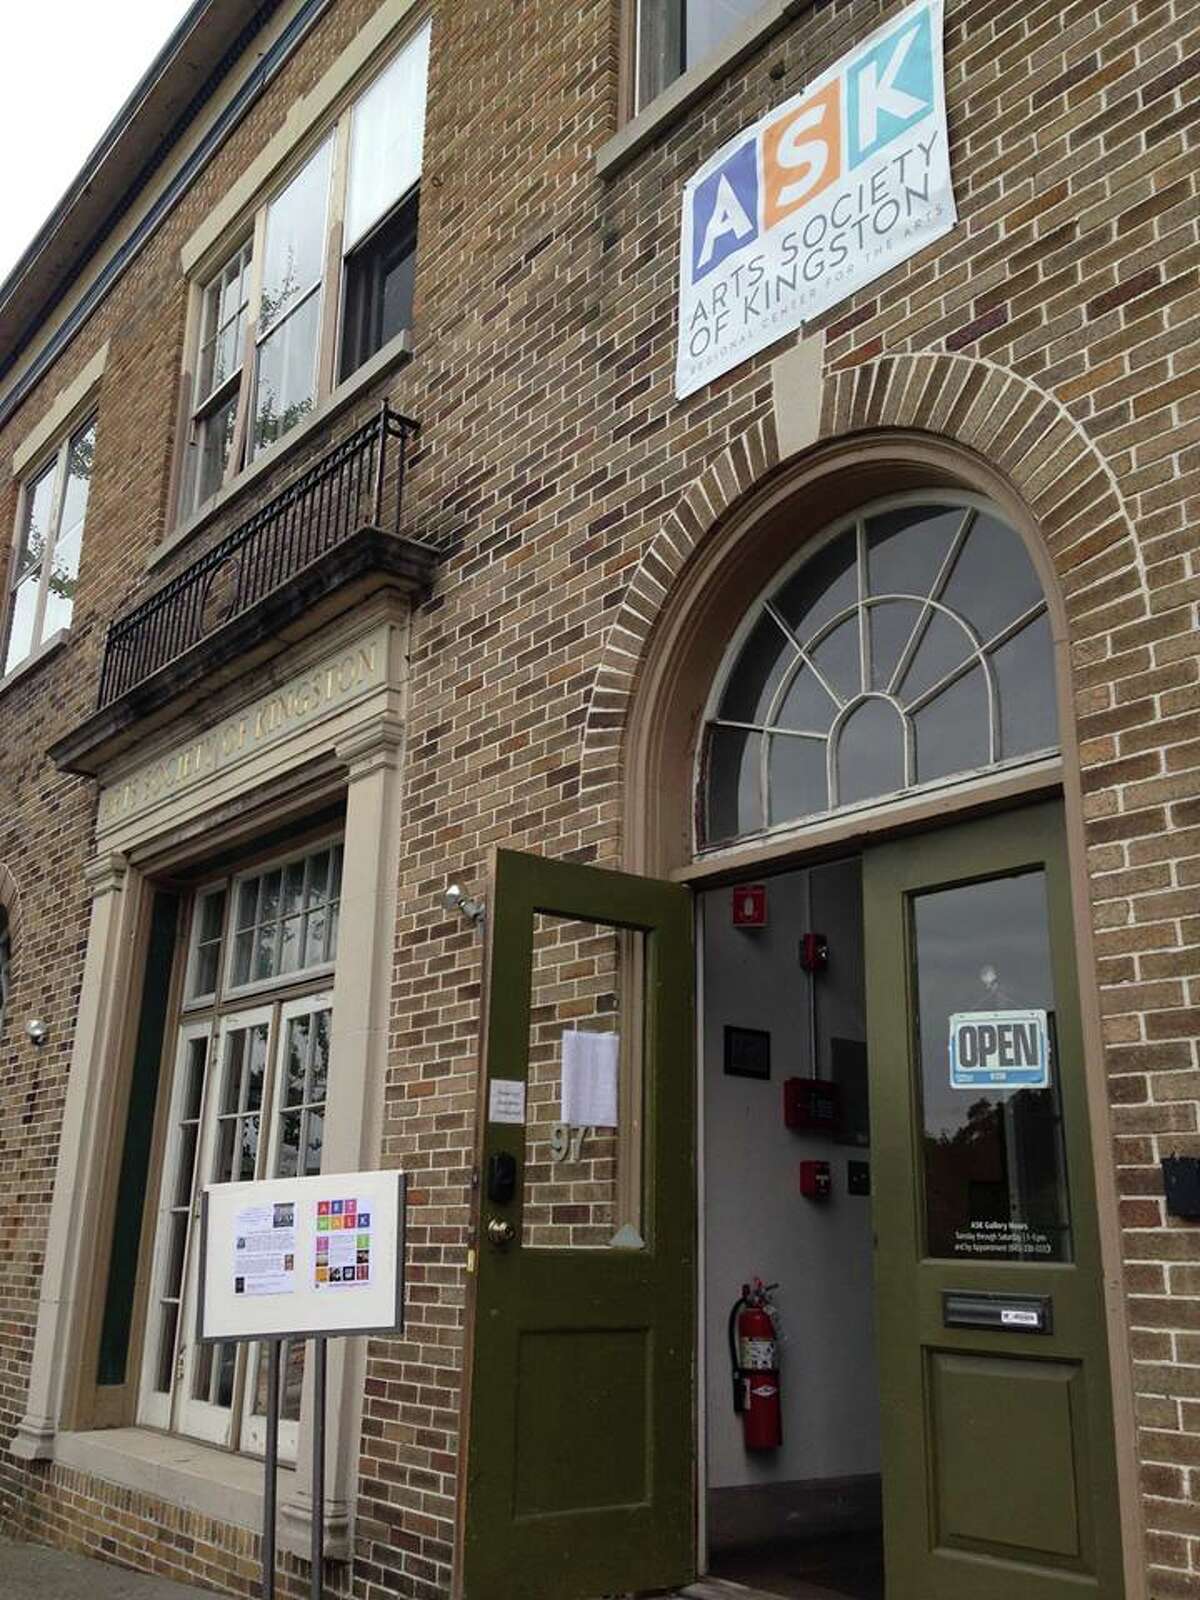 The Arts Society of Kingston, founded in 1995 as an umbrella organization for regional arts, moved into its own building in 2005 and has two galleries, each with different monthly shows all year, and a 99-seat performance space. ASK's summer calendar, in addition to exhibits, includes classes, readings, concerts and swing dance nights.